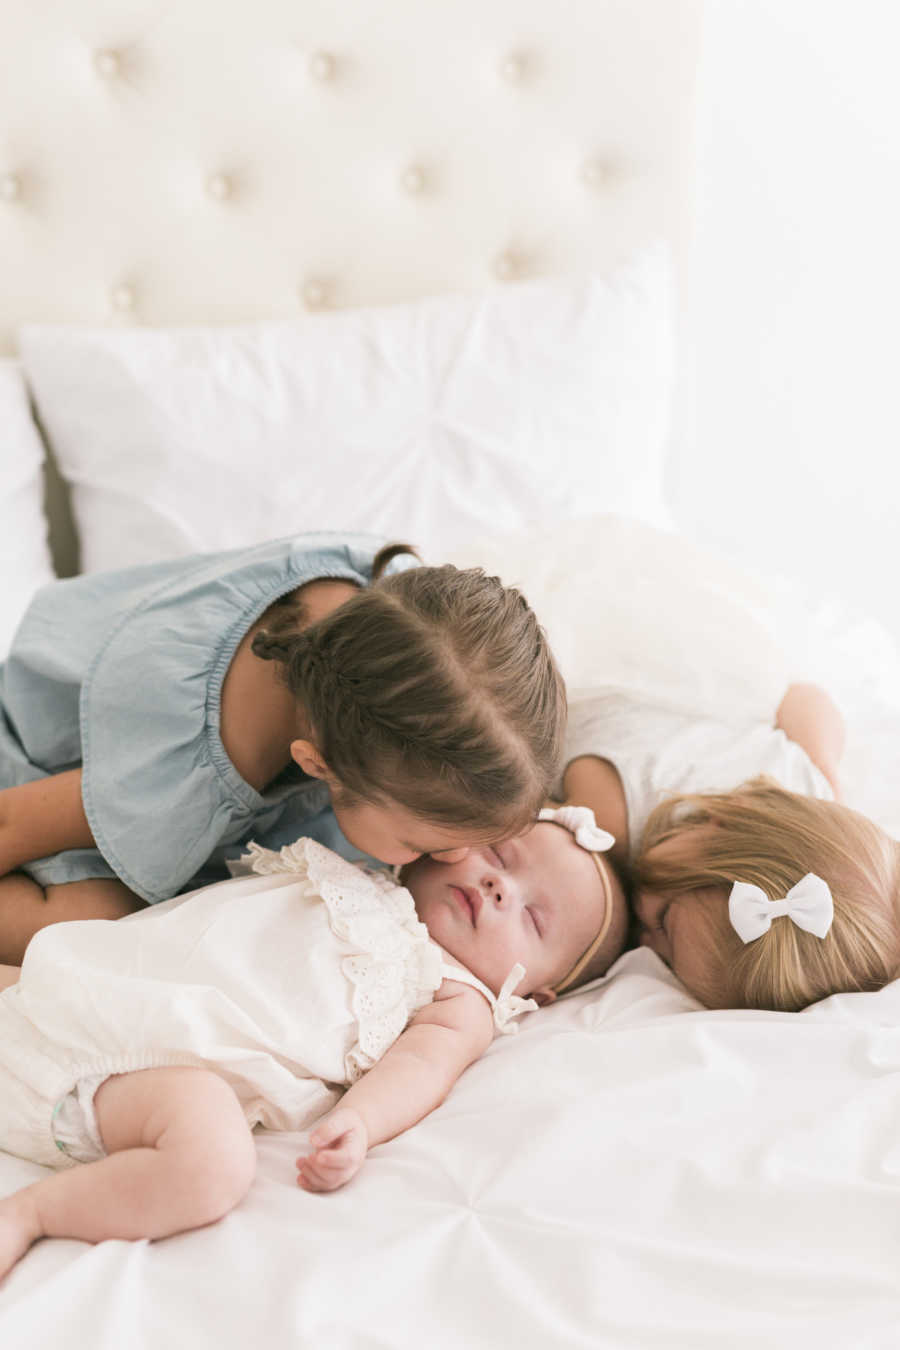 Newborn with down syndrome lays in bed while one older sister kisses her and other lays beside her